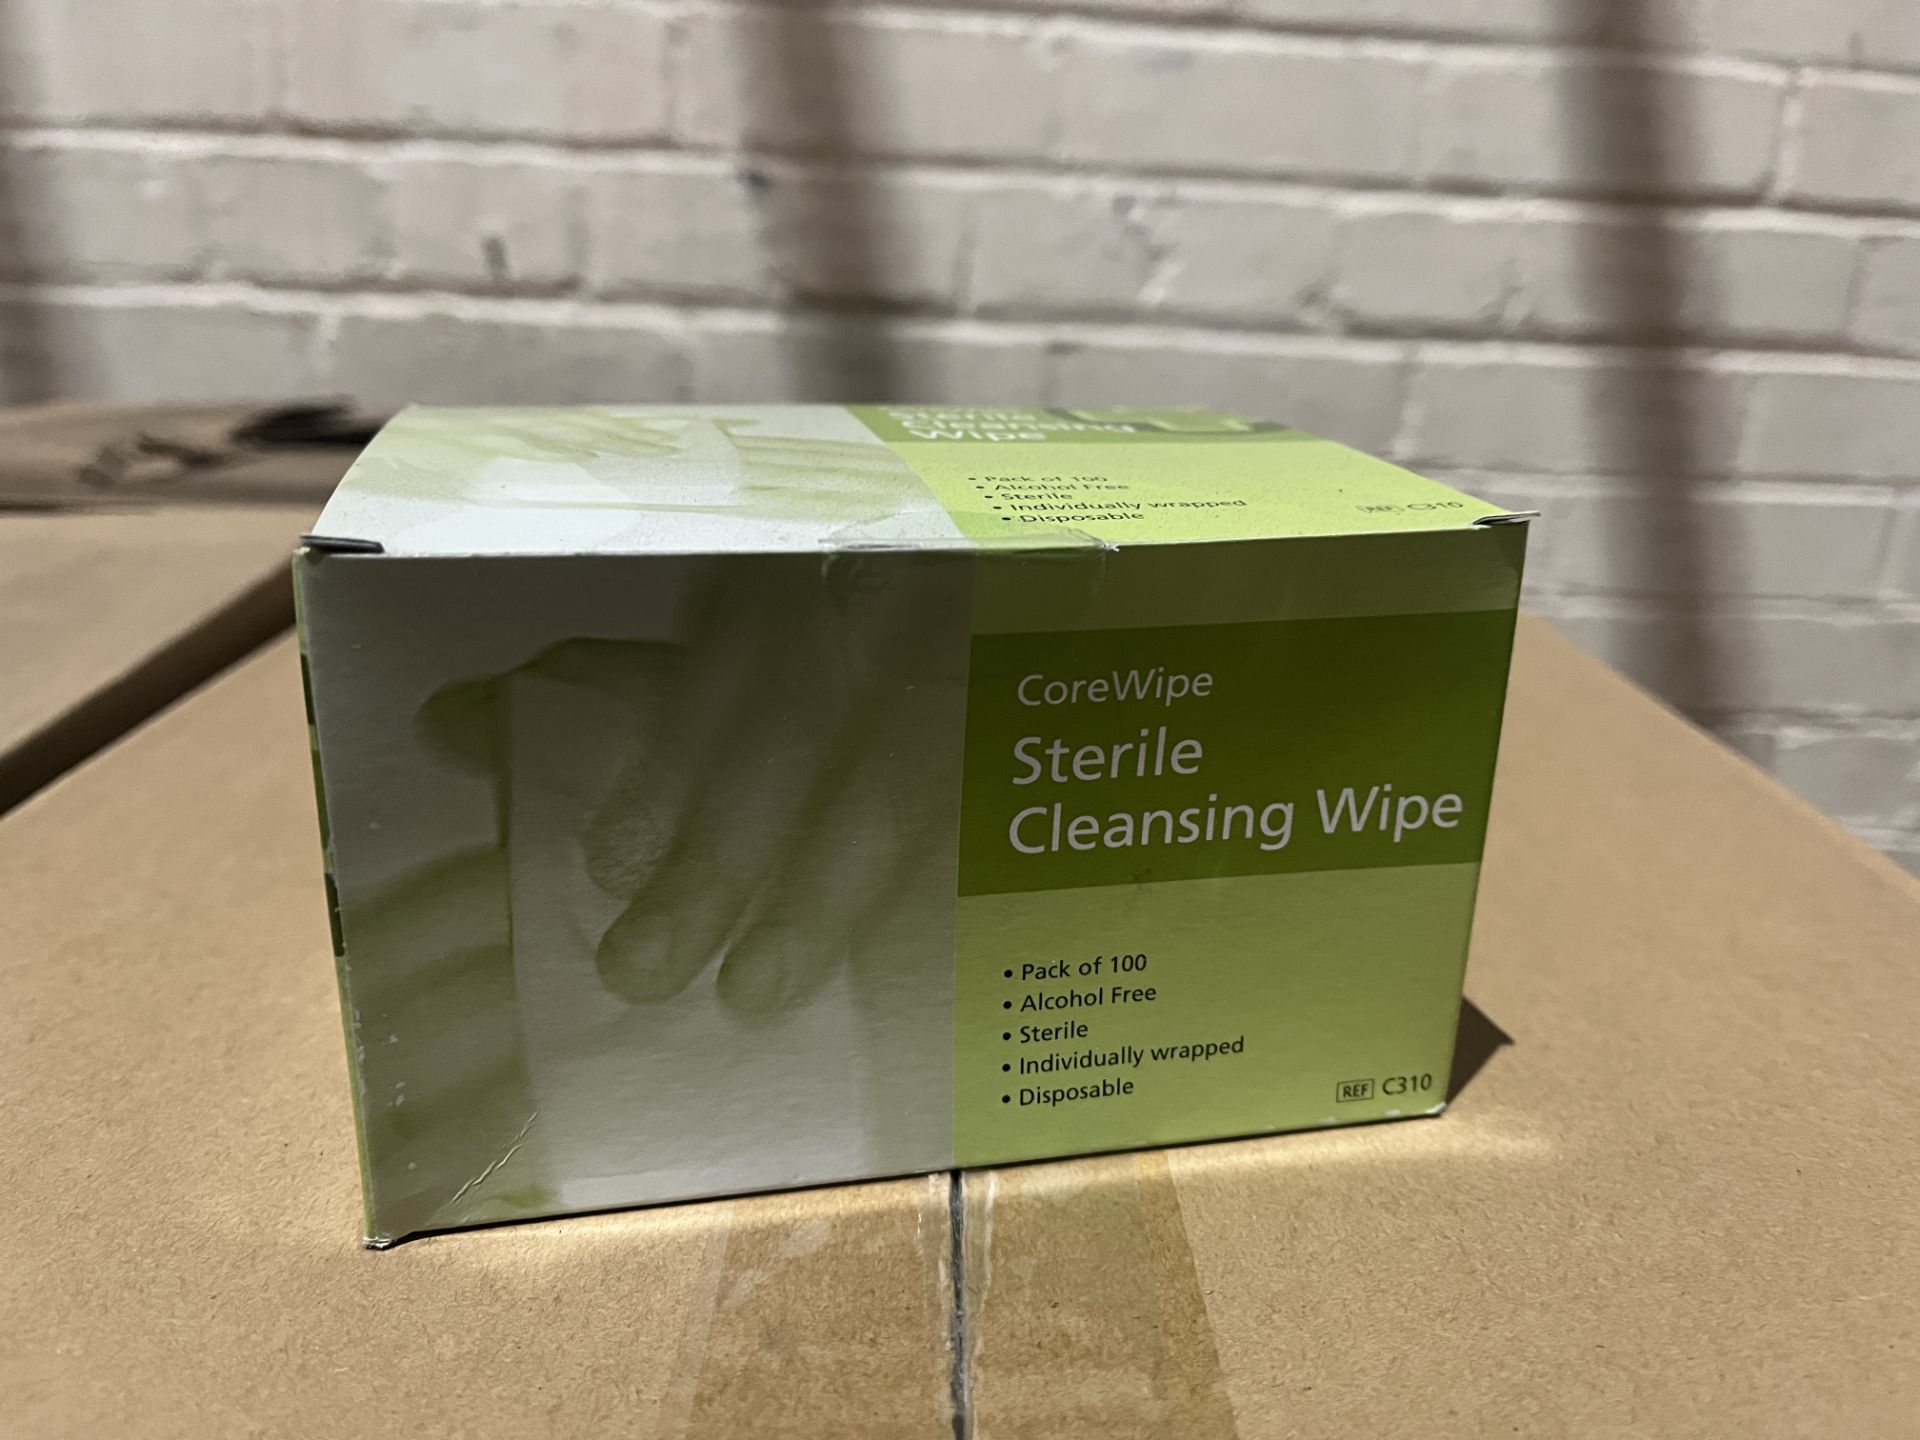 40 X BRAND NEW PACKS OF 100 COREWIPE STERILE CLEANSING WIPES R9-10